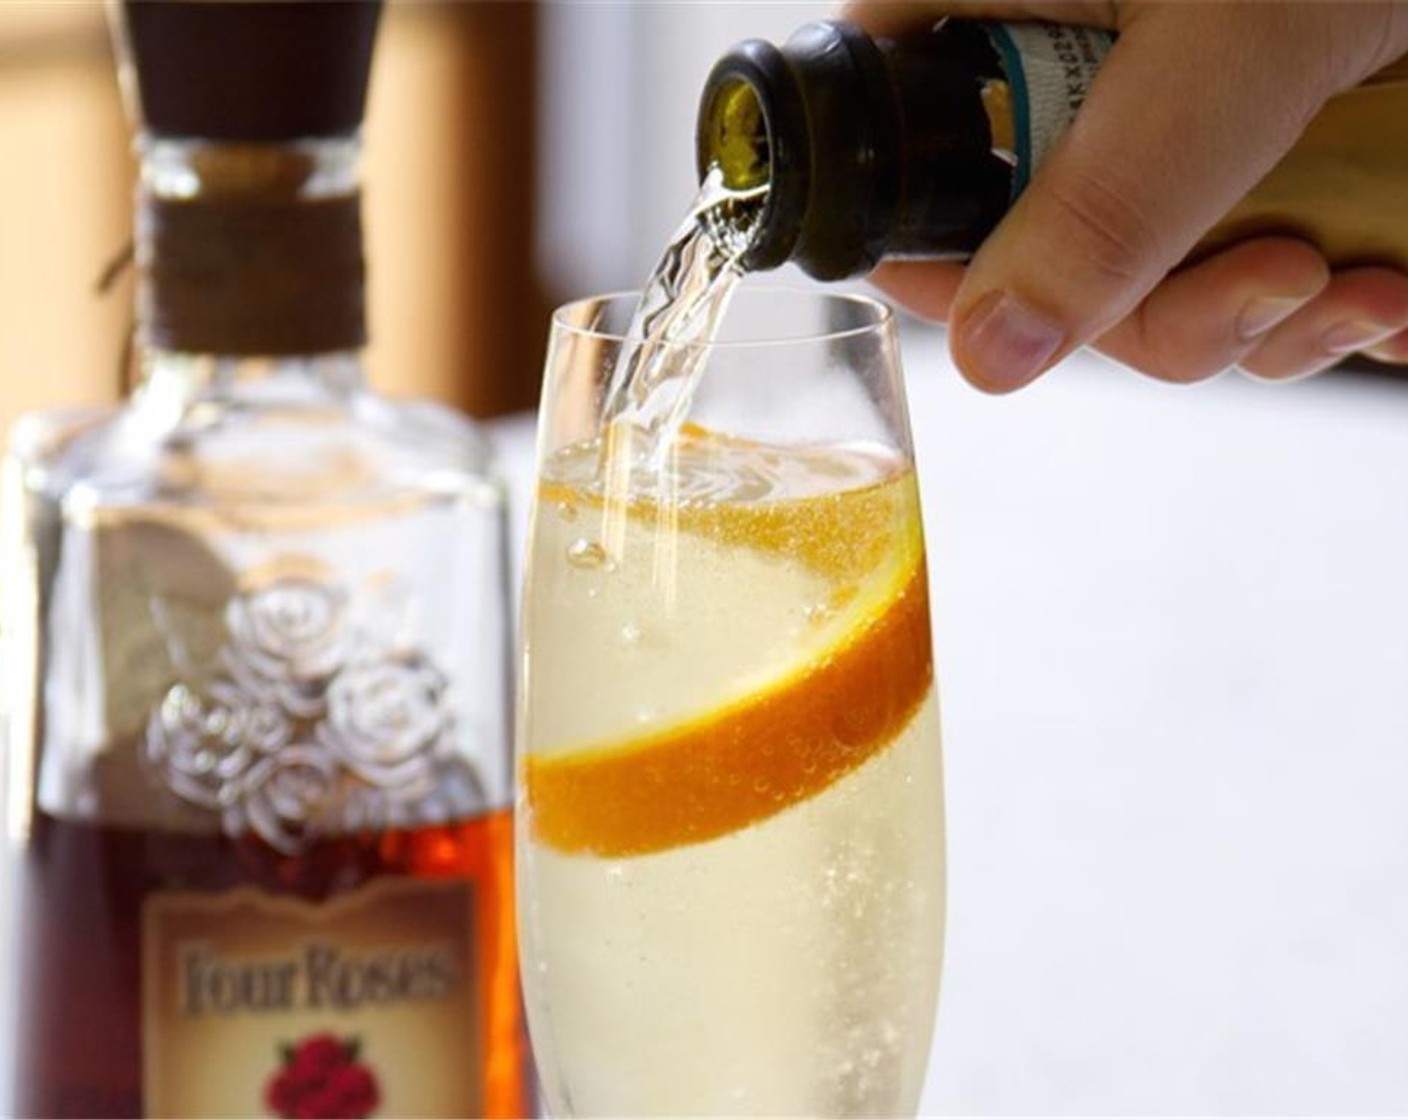 step 1 Pour just a splash of Four Roses Bourbon (1 splash) and Orange Liqueur (1 splash) into a champagne glass. Top off the glass with your favorite Prosecco Wine (to taste).